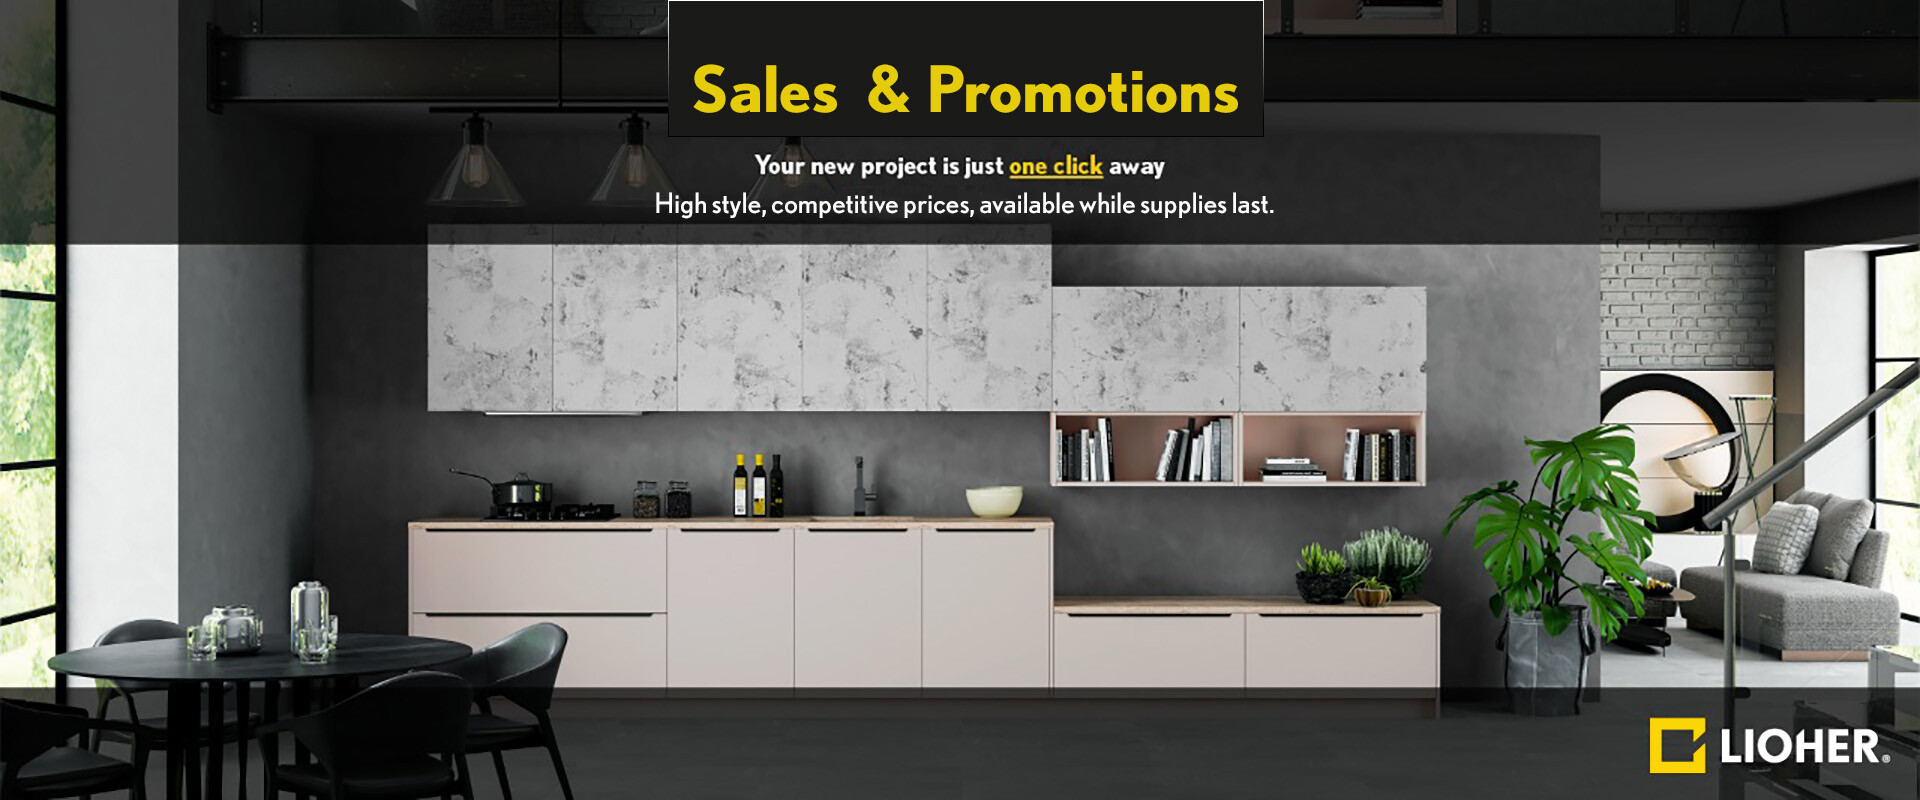 Lioher sales-banner-1 Sales and Promotions  